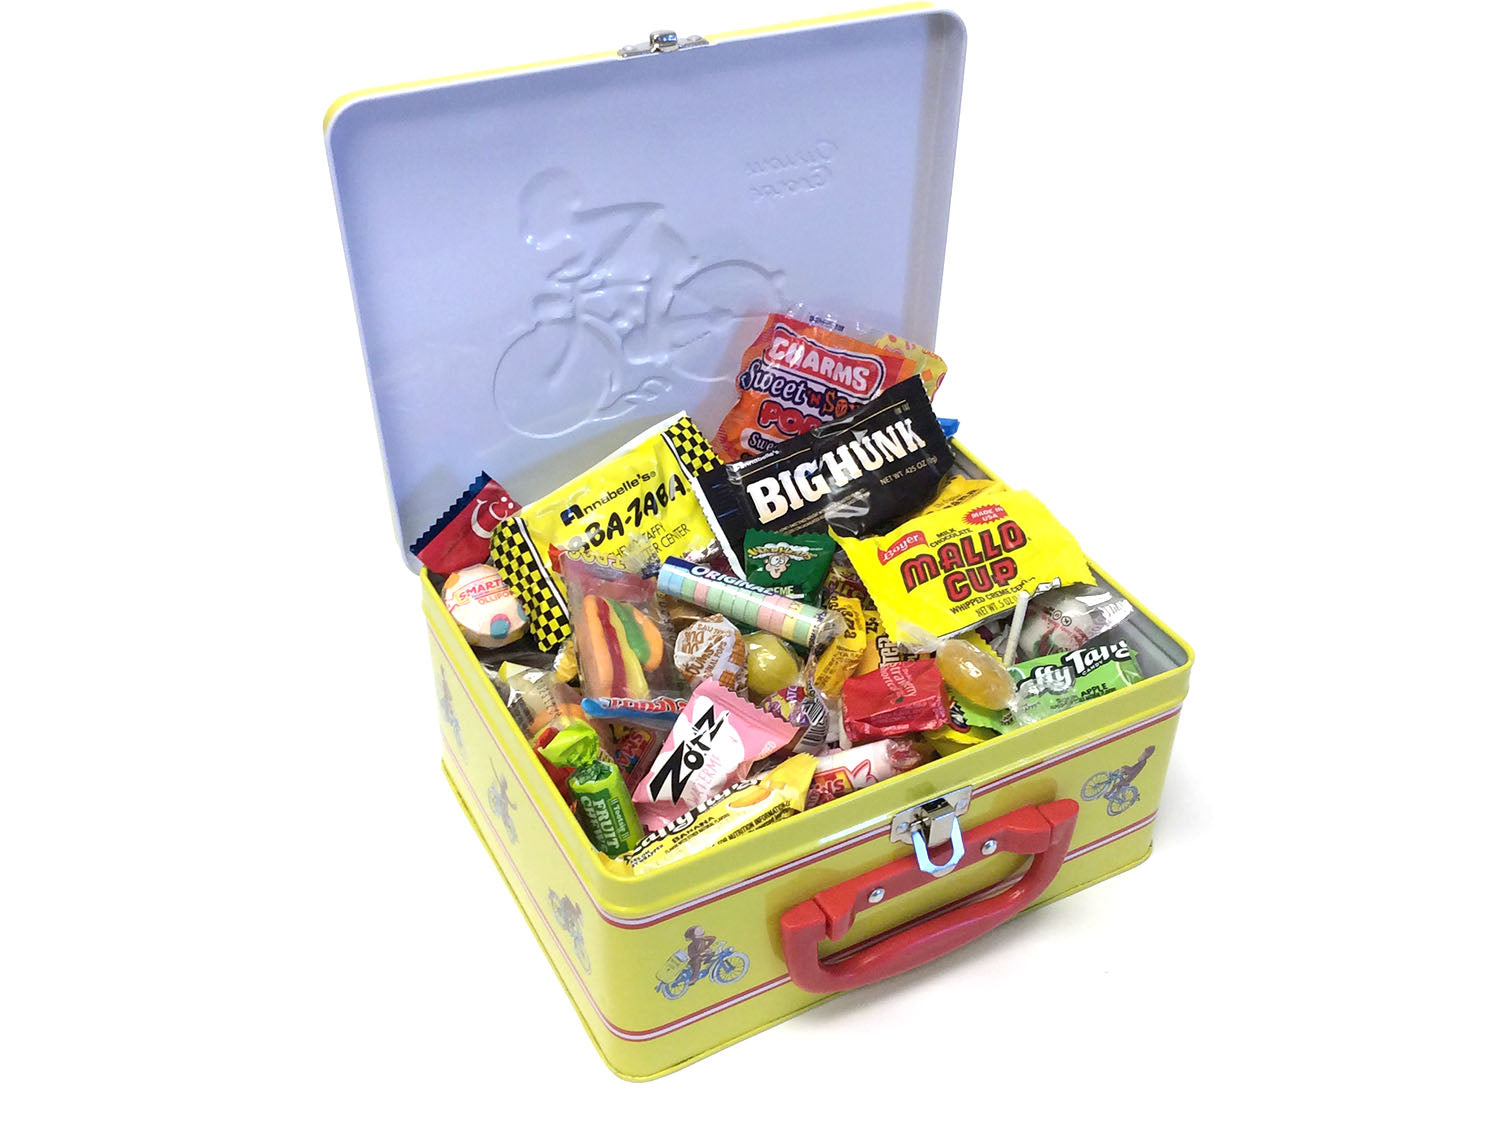 Curious George Lunch Box filled with Candy you ate as a kid®